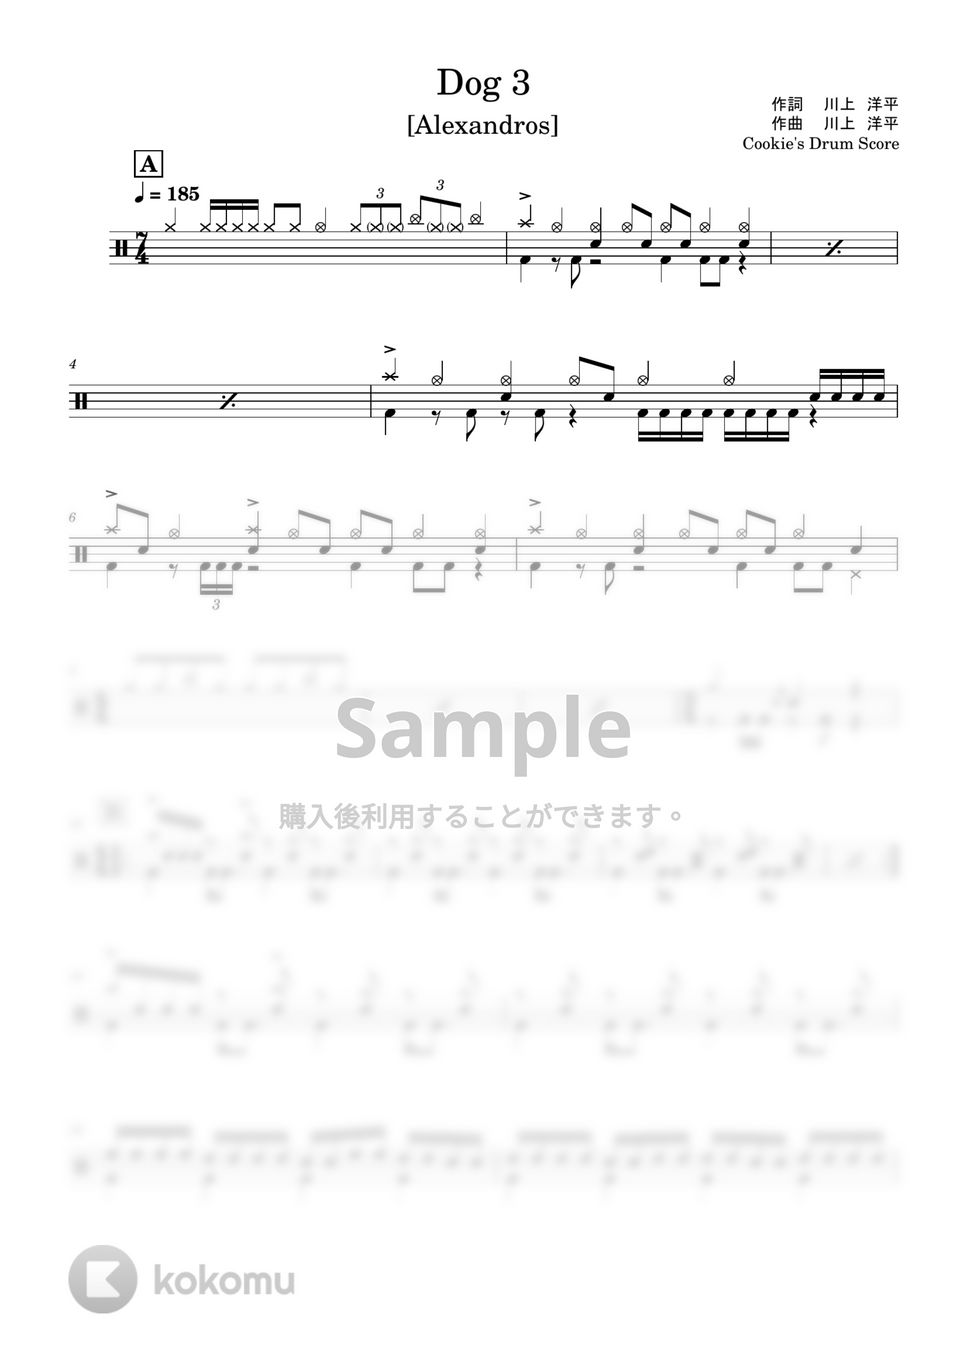 [Alexandros] - Dog 3 by Cookie's Drum Score